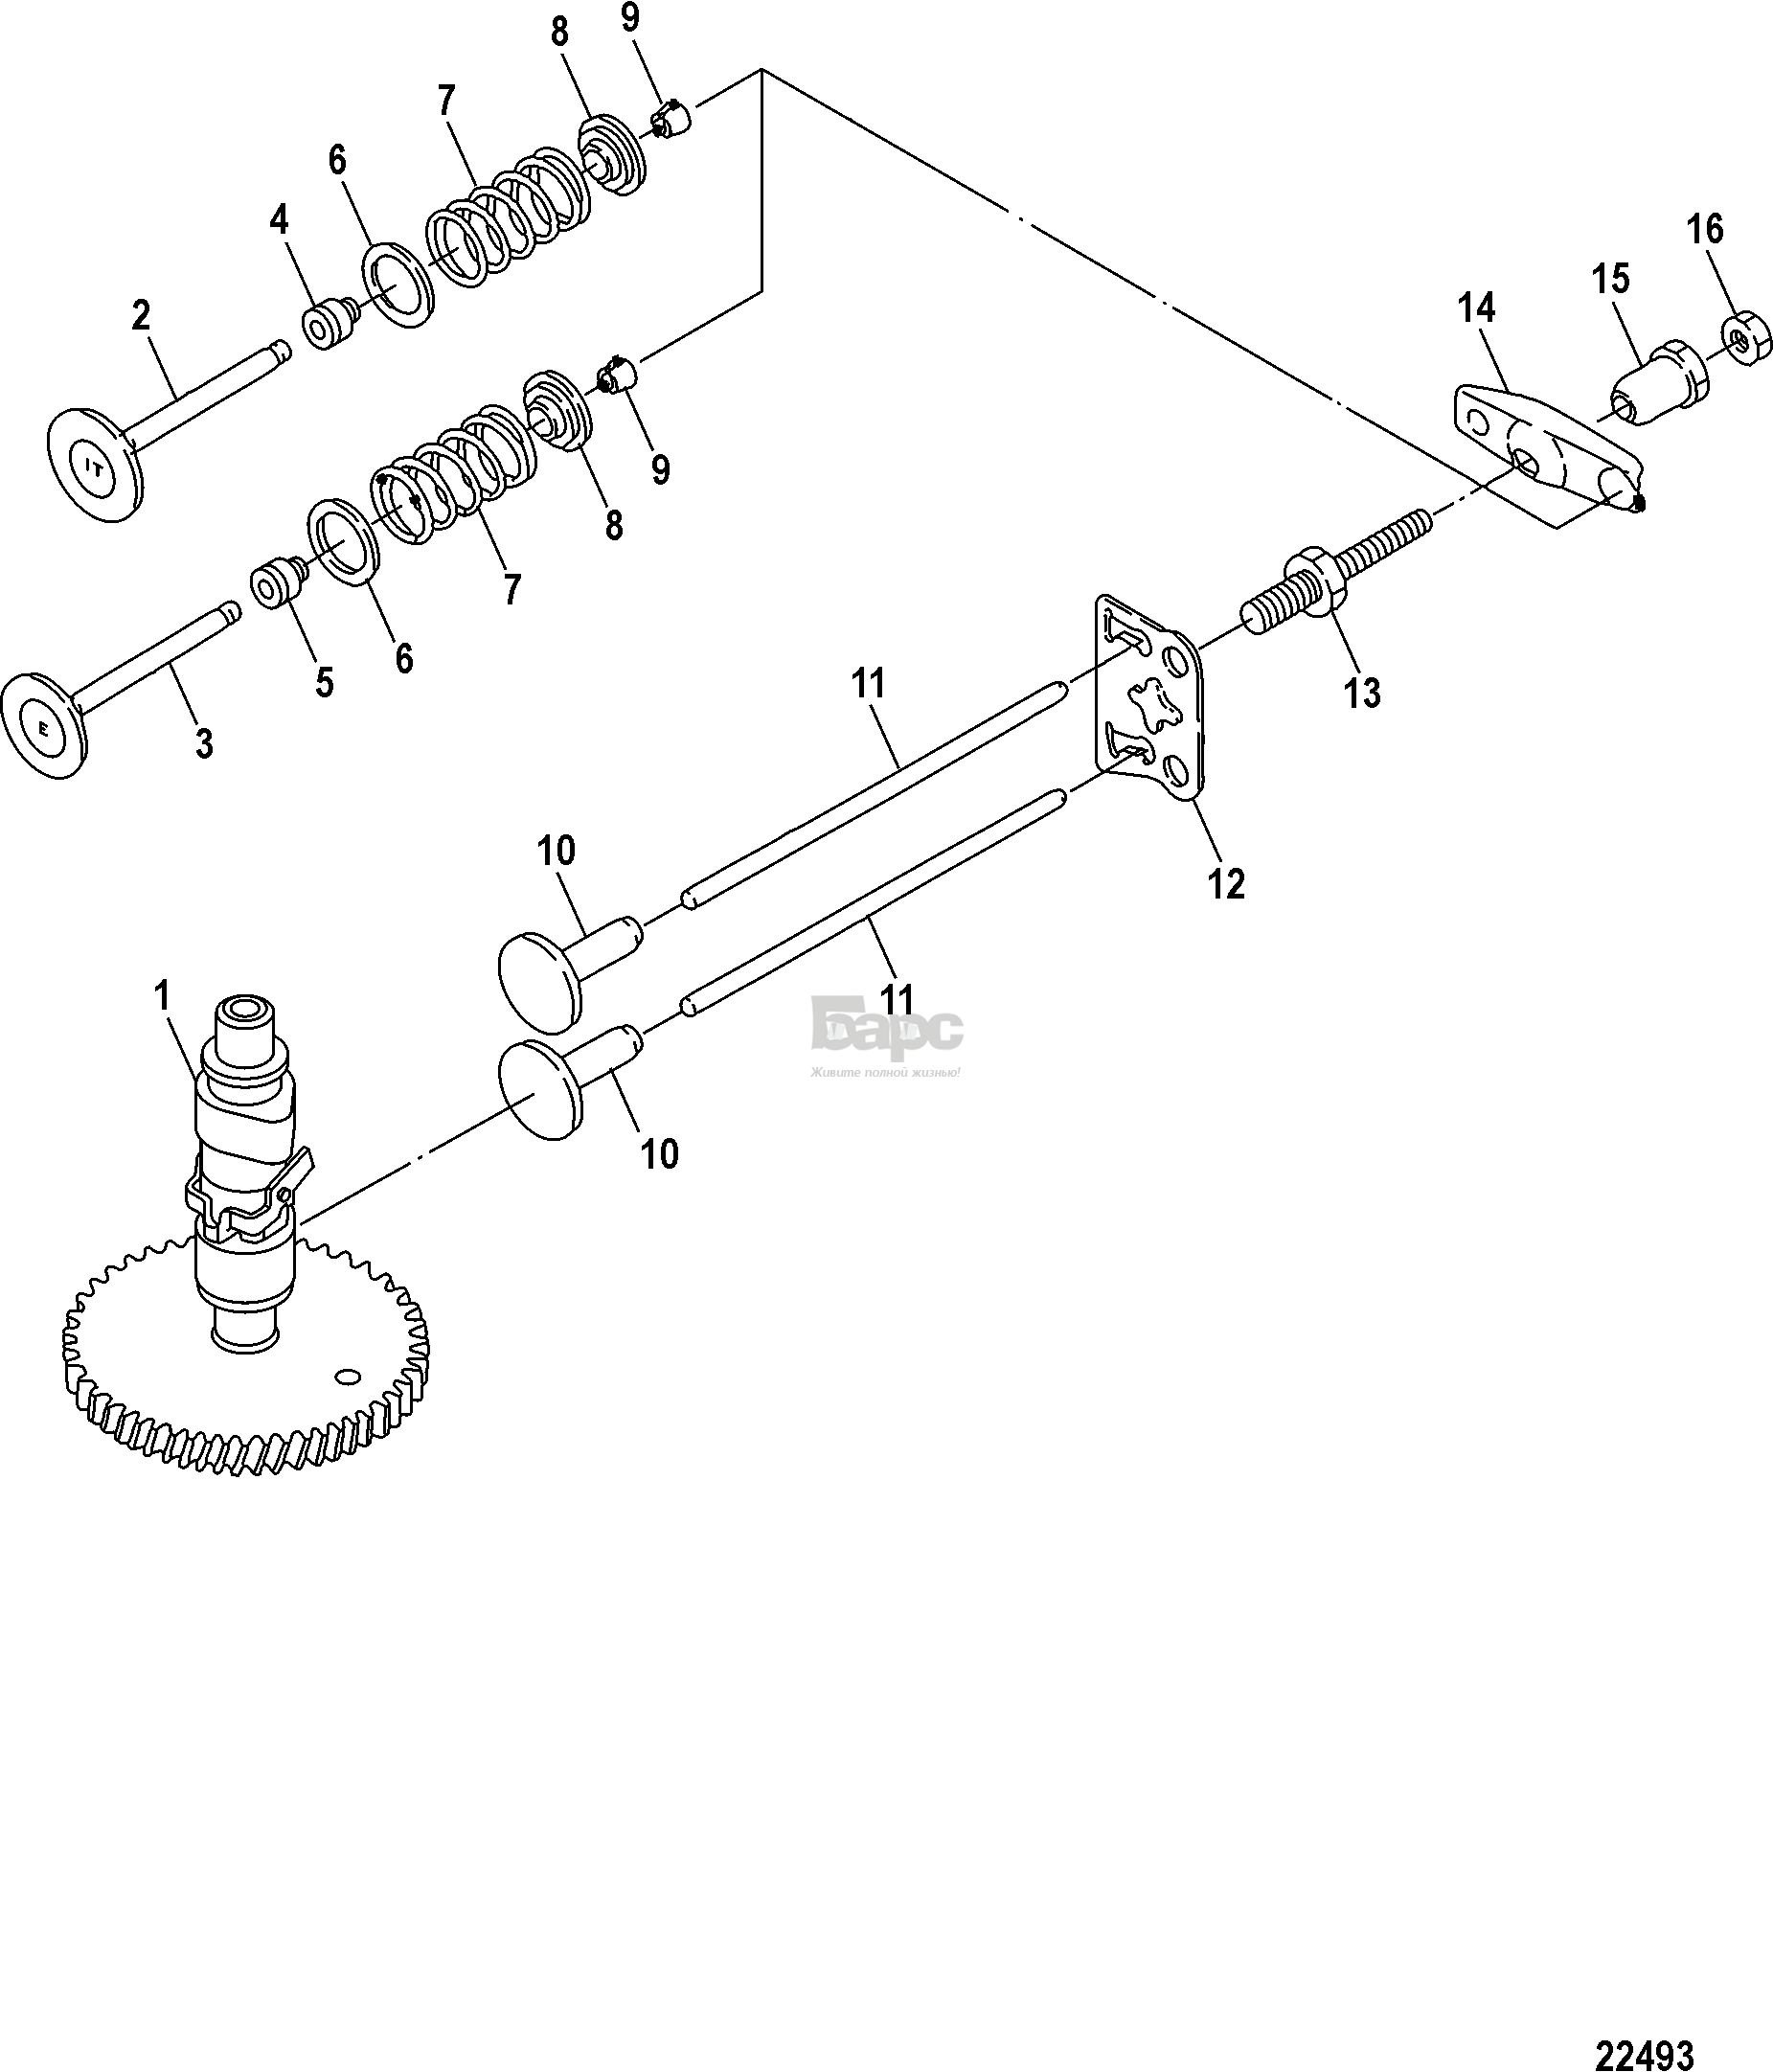 Camshaft and Valves, Serial # 0R318095 and Below